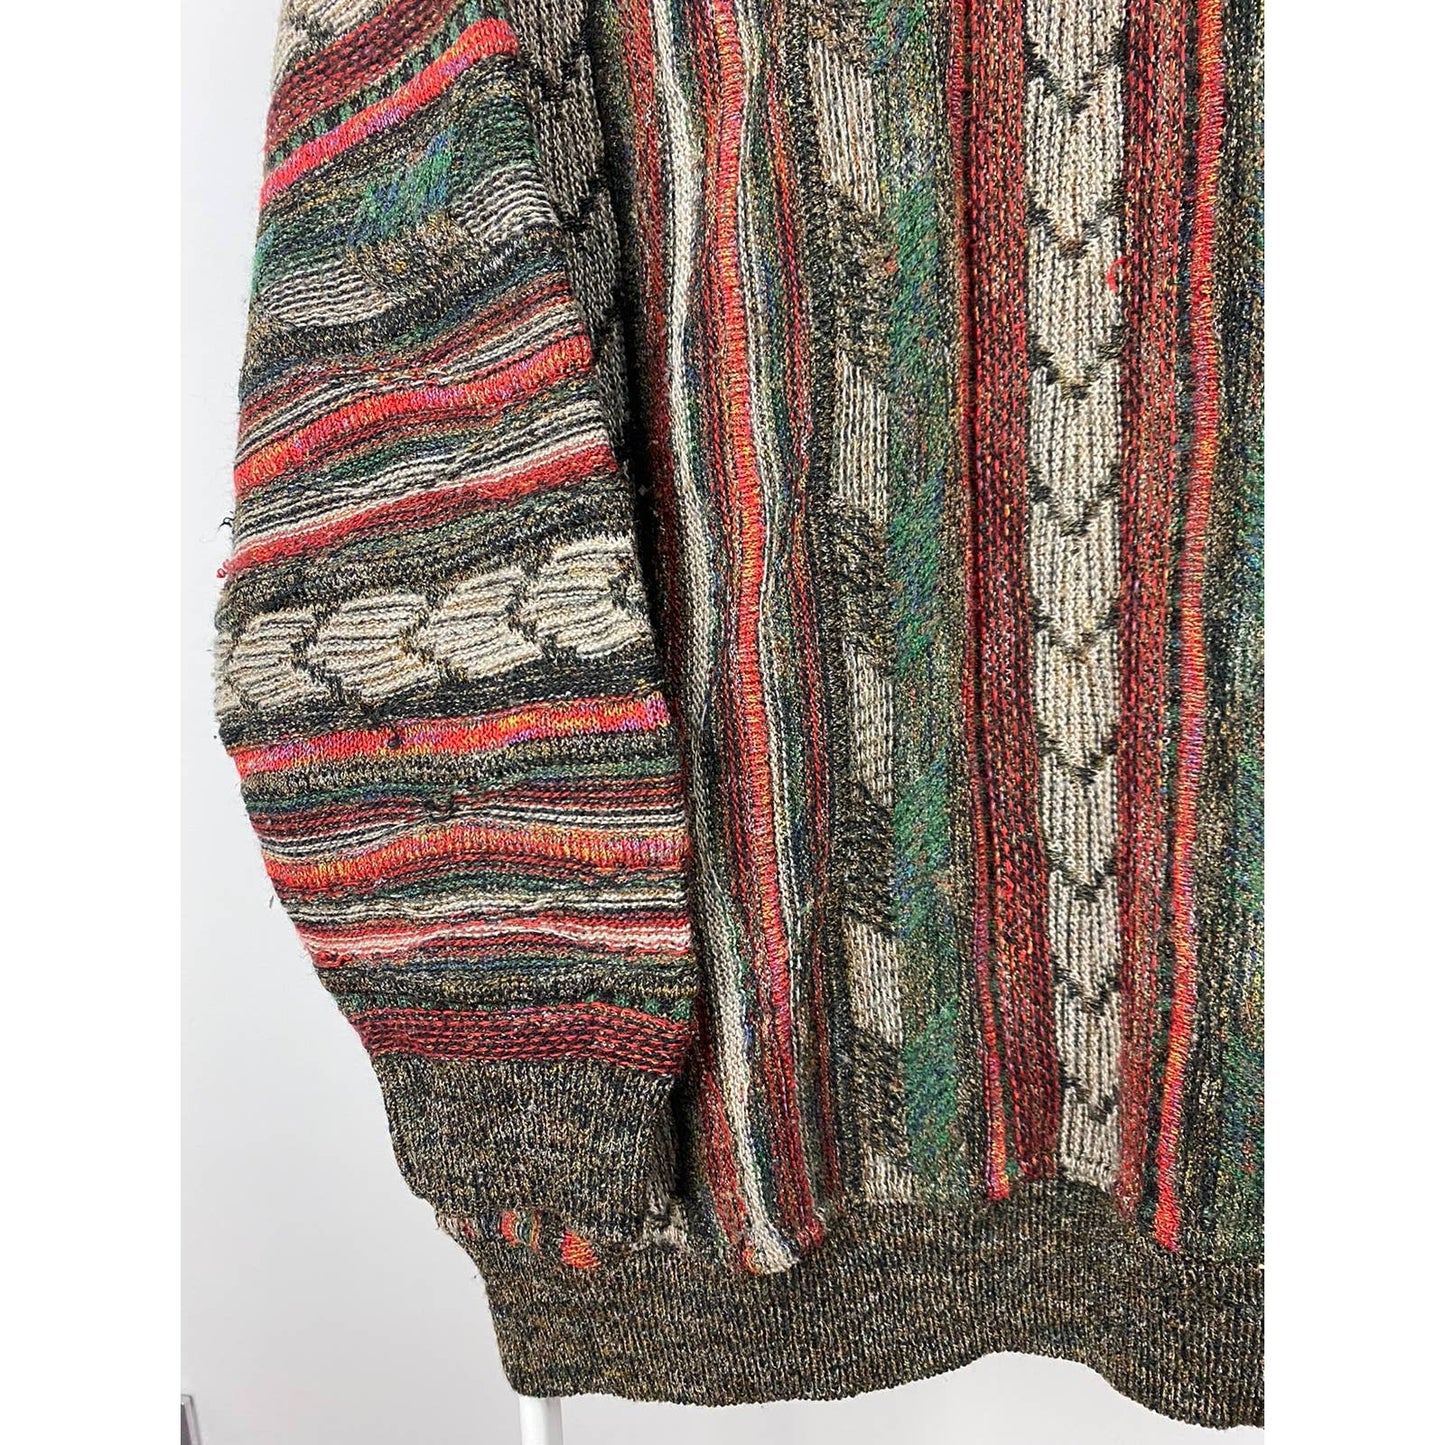 Vintage coloured cable knit sweater khaki green Coogi style